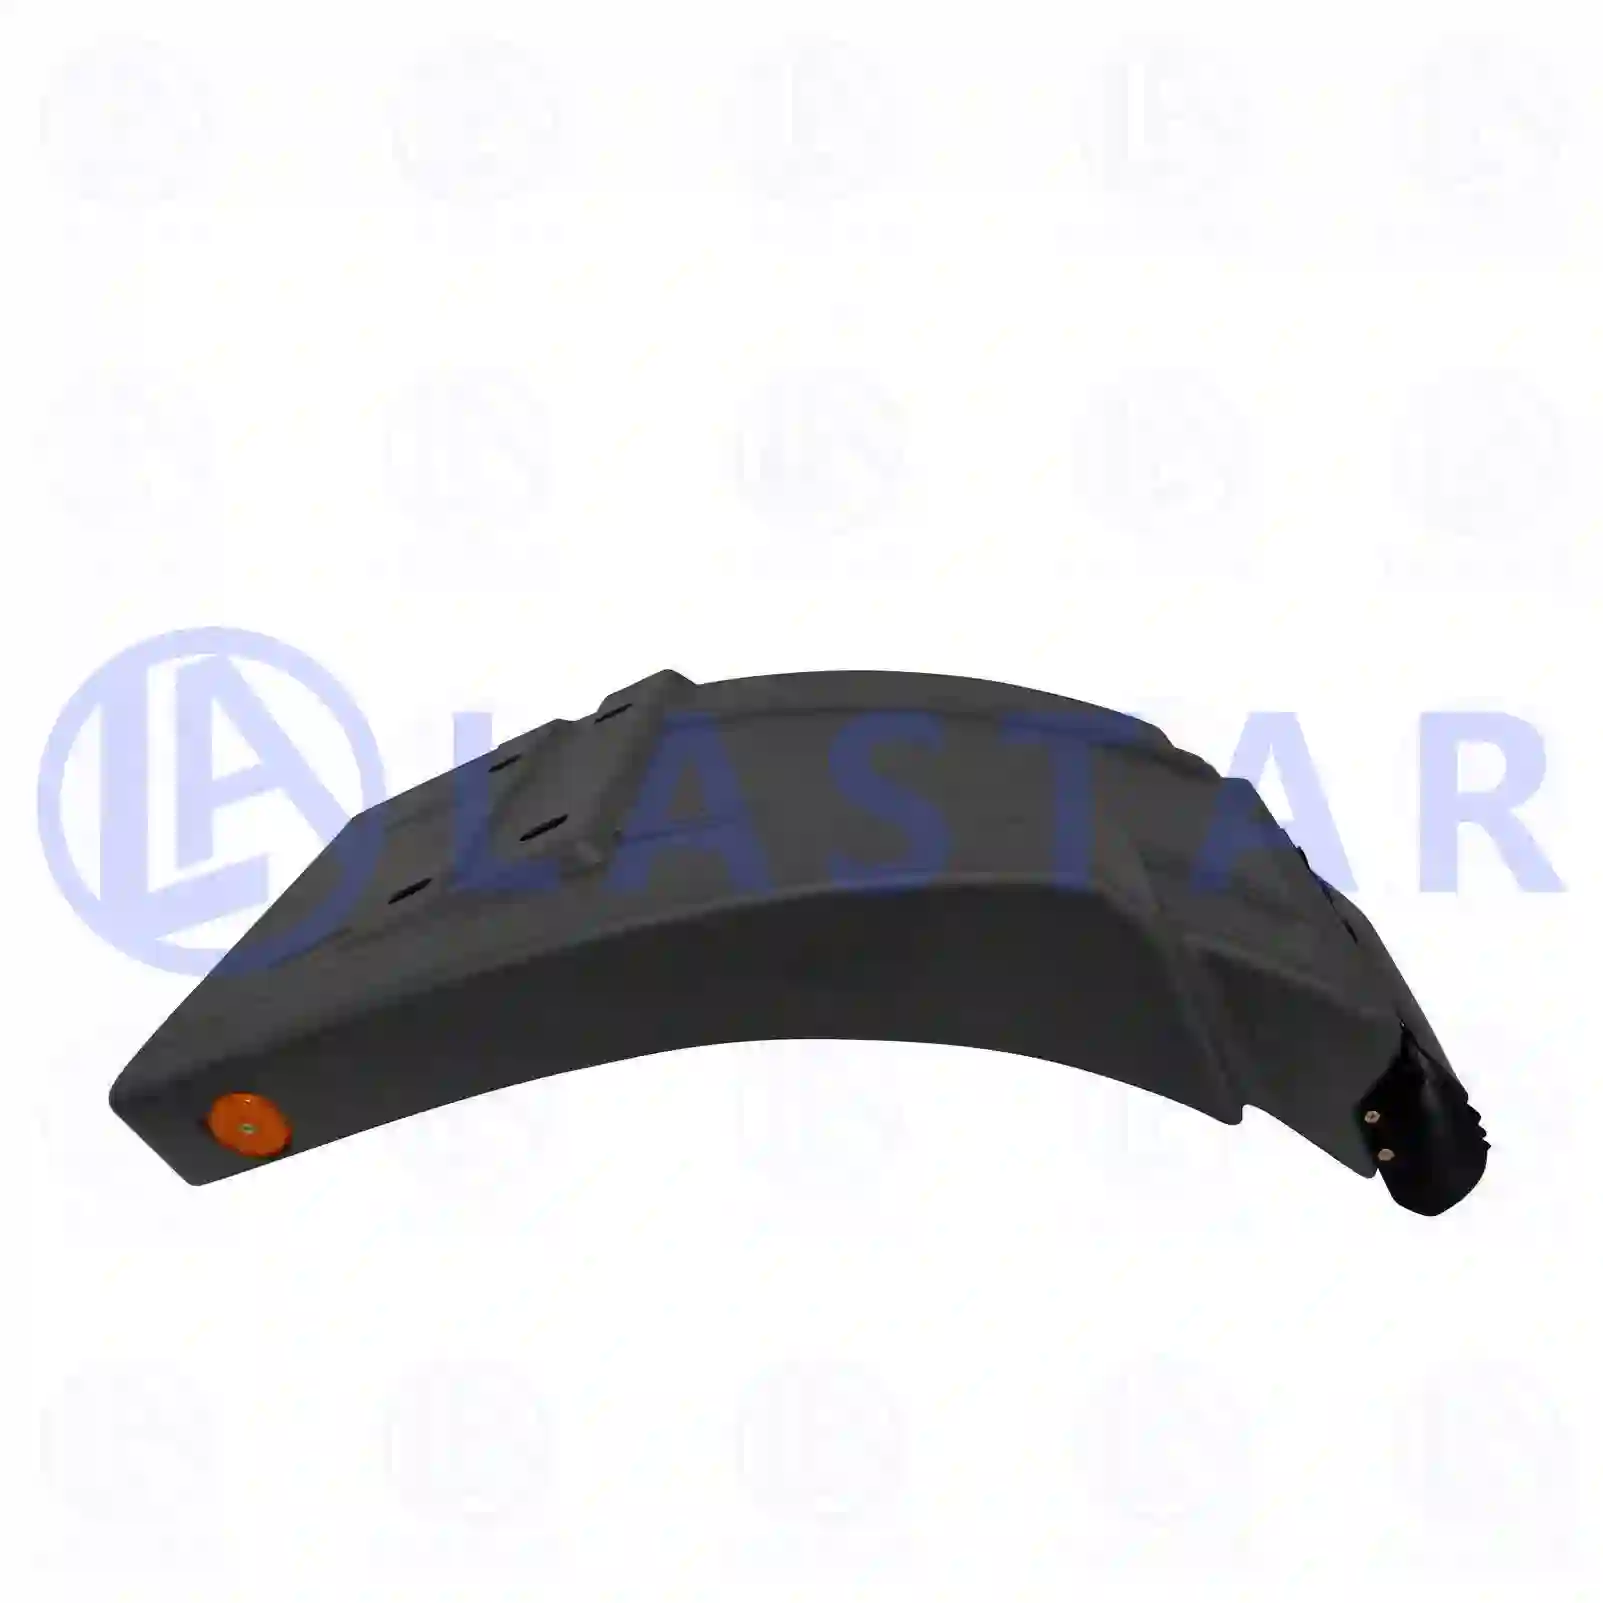  Front fender, rear, right || Lastar Spare Part | Truck Spare Parts, Auotomotive Spare Parts